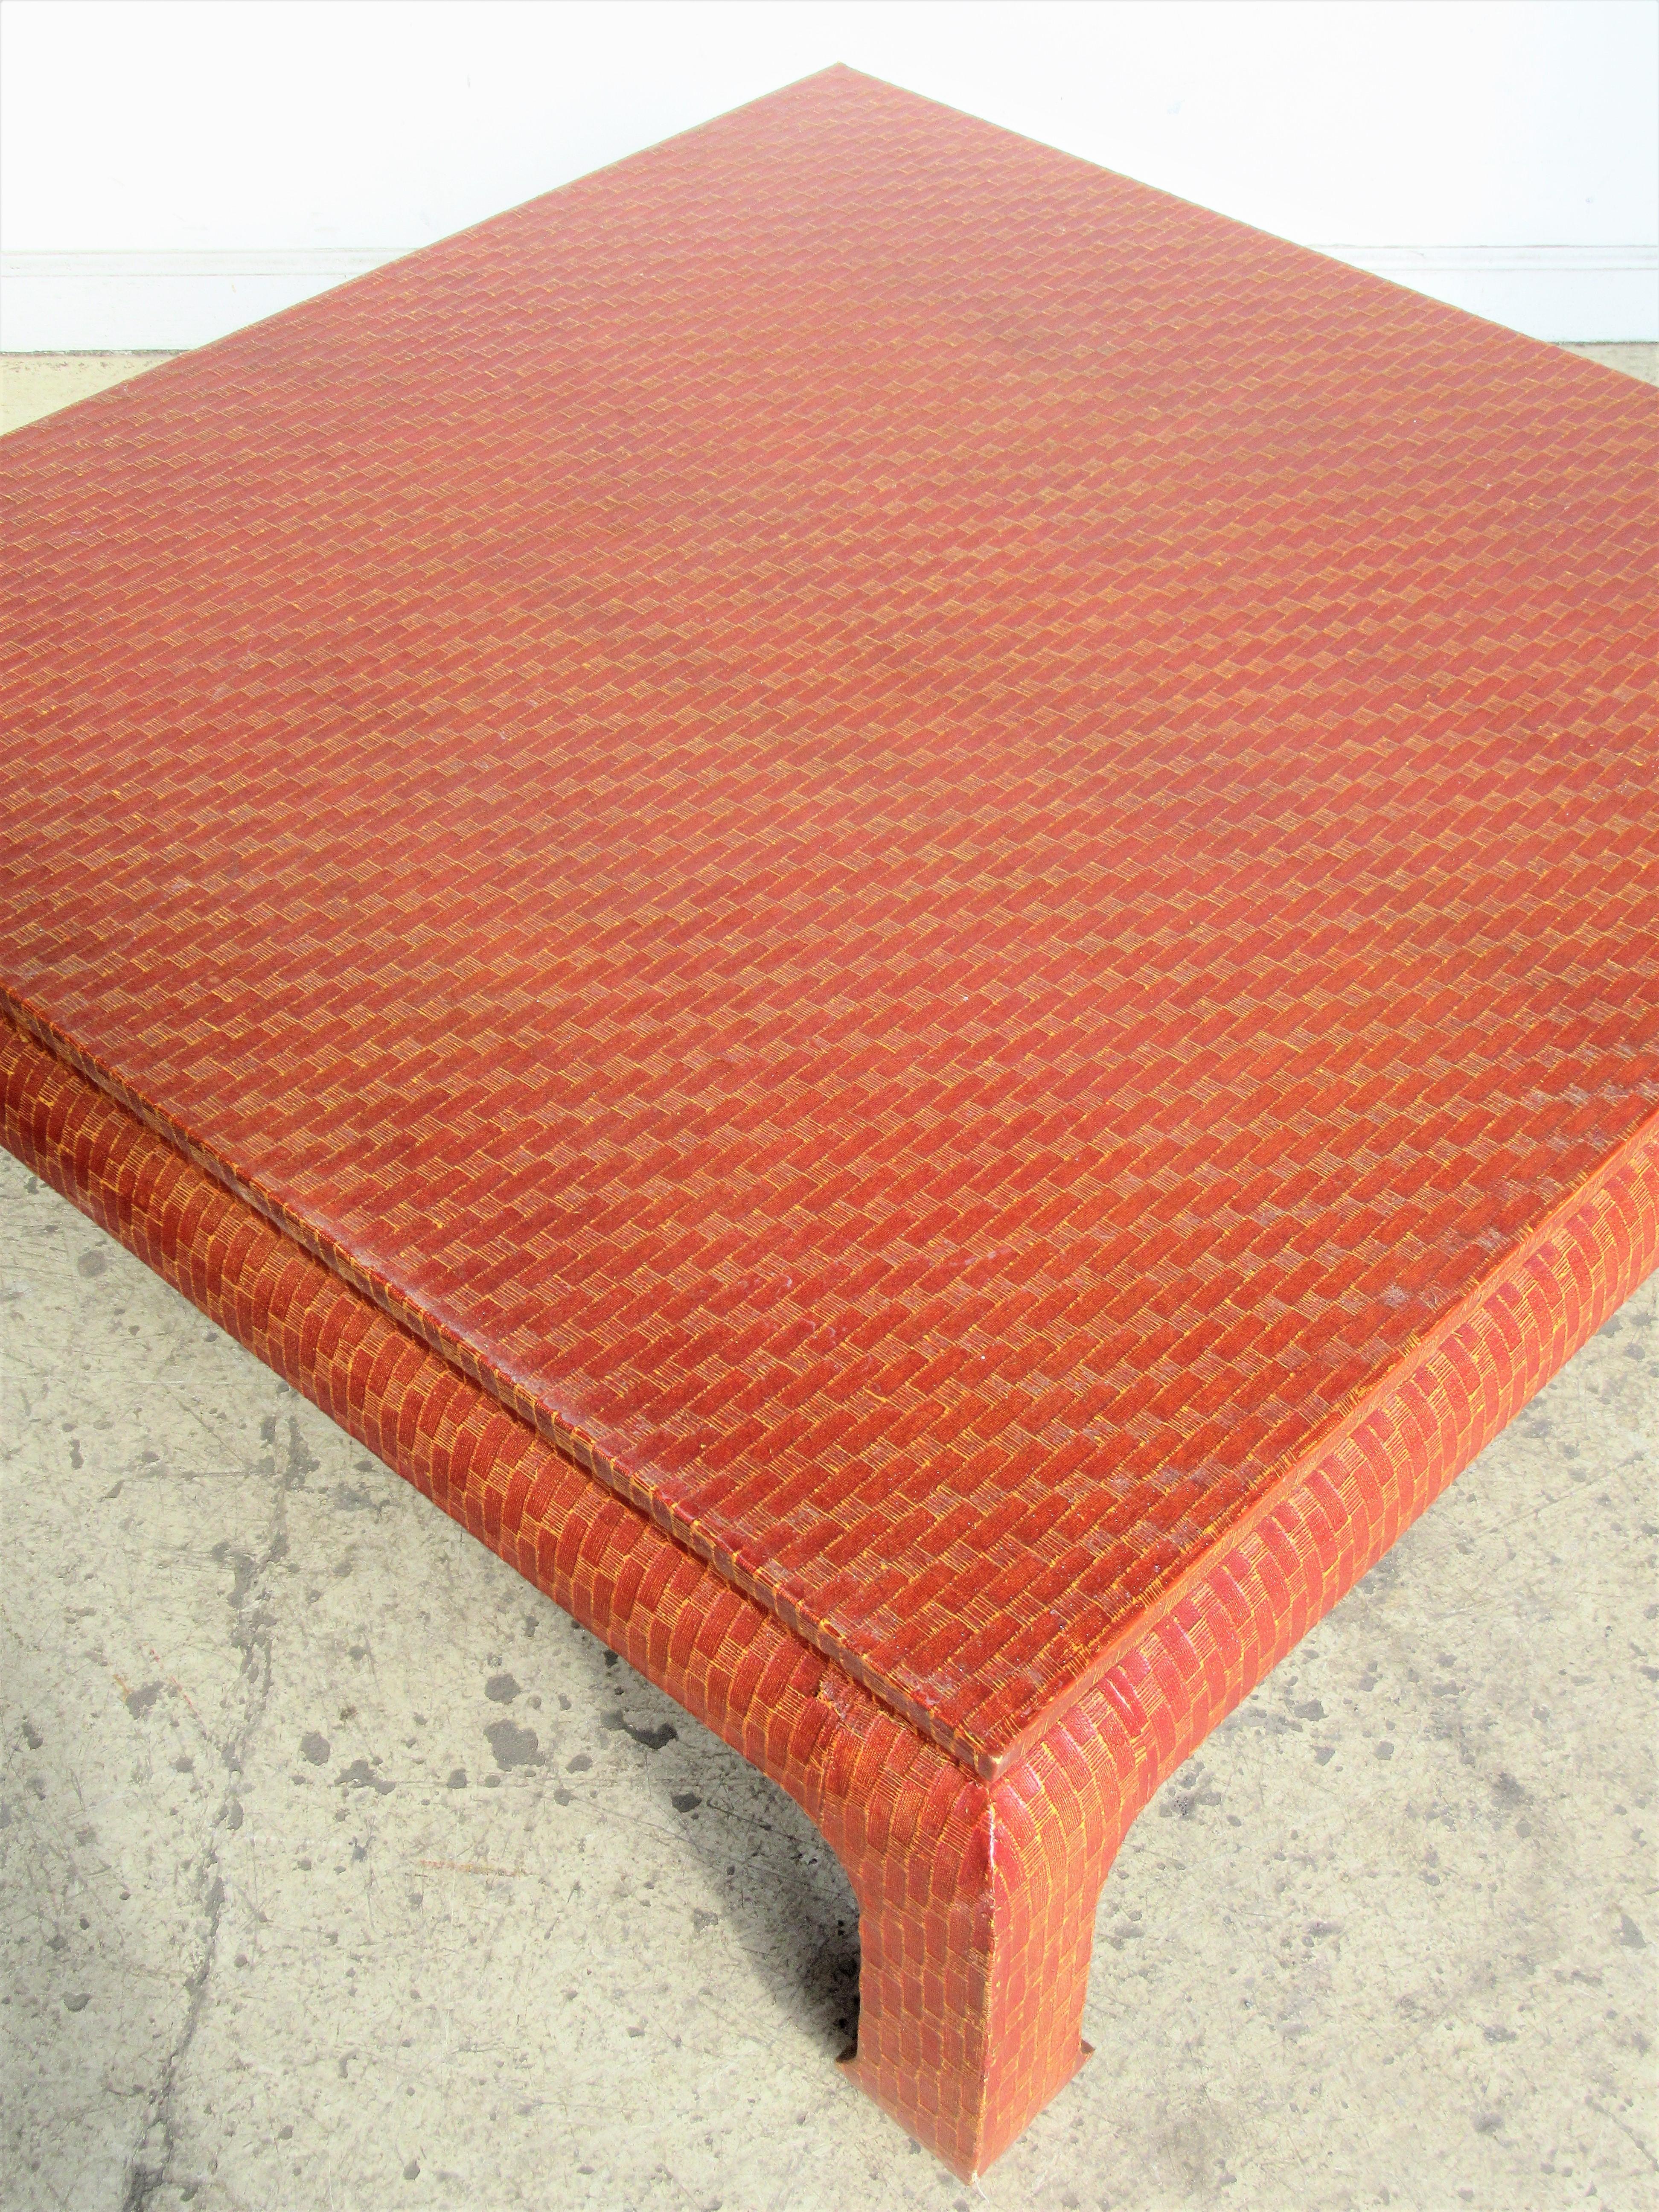 Texture patterned raffia wrapped Ming style coffee table by Baker Furniture in the most beautiful glowing custom burnt orange to sienna red tone finish. In the style of Karl Springer, circa 1970. This one is a showstopper. Look at all pictures and